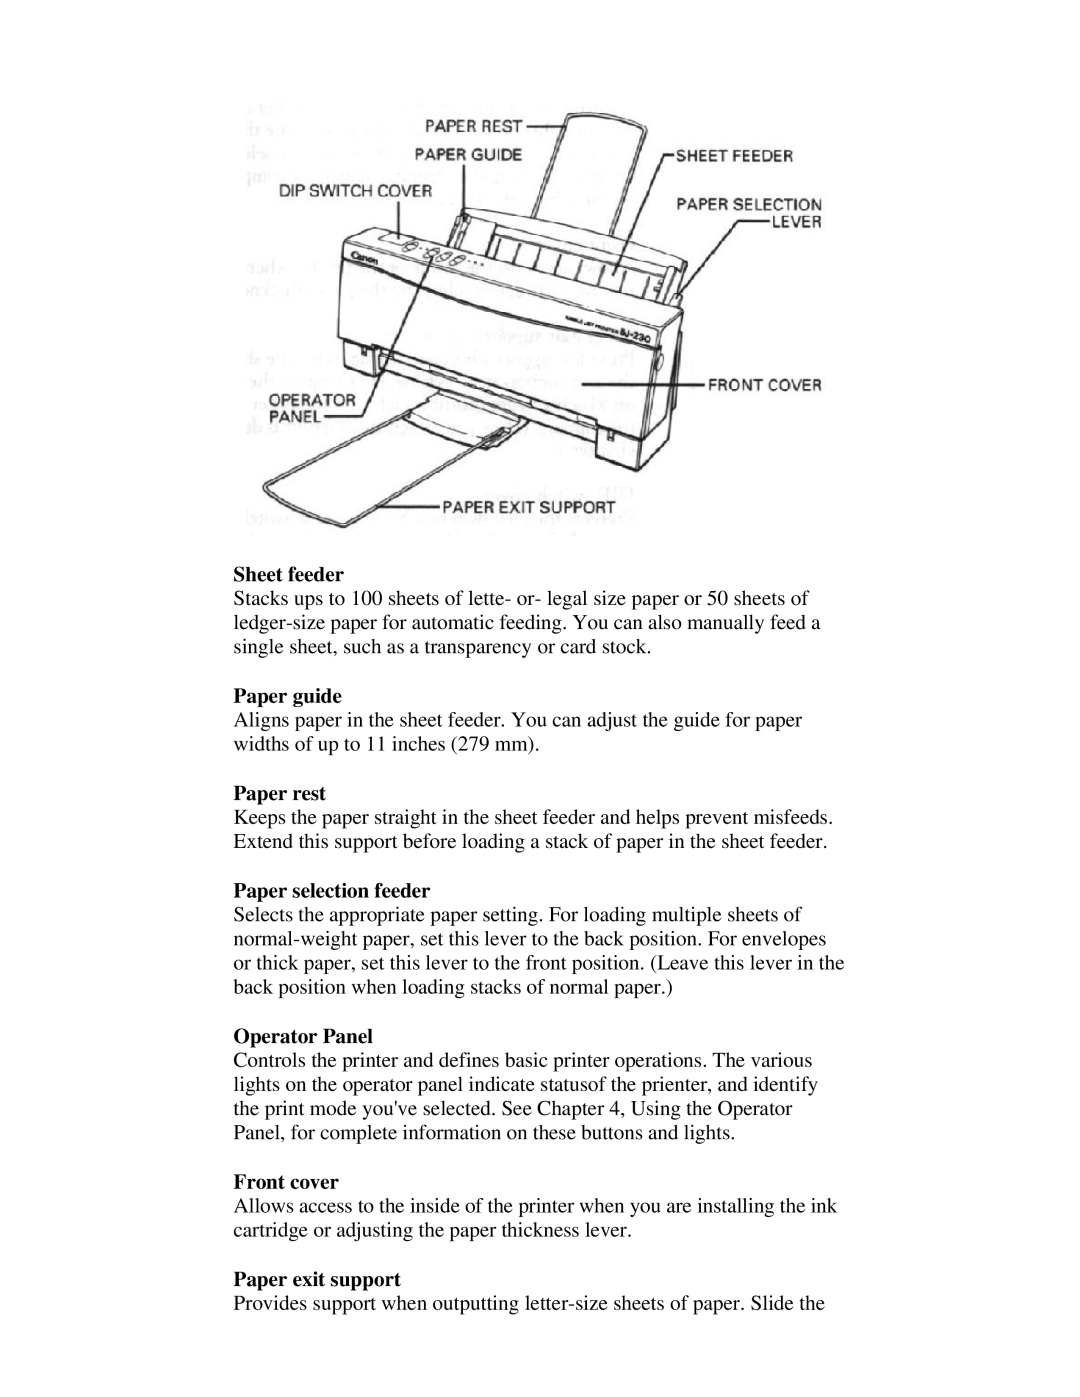 Canon BJ-230 user manual Sheet feeder, Paper guide, Paper rest, Paper selection feeder, Operator Panel, Front cover 